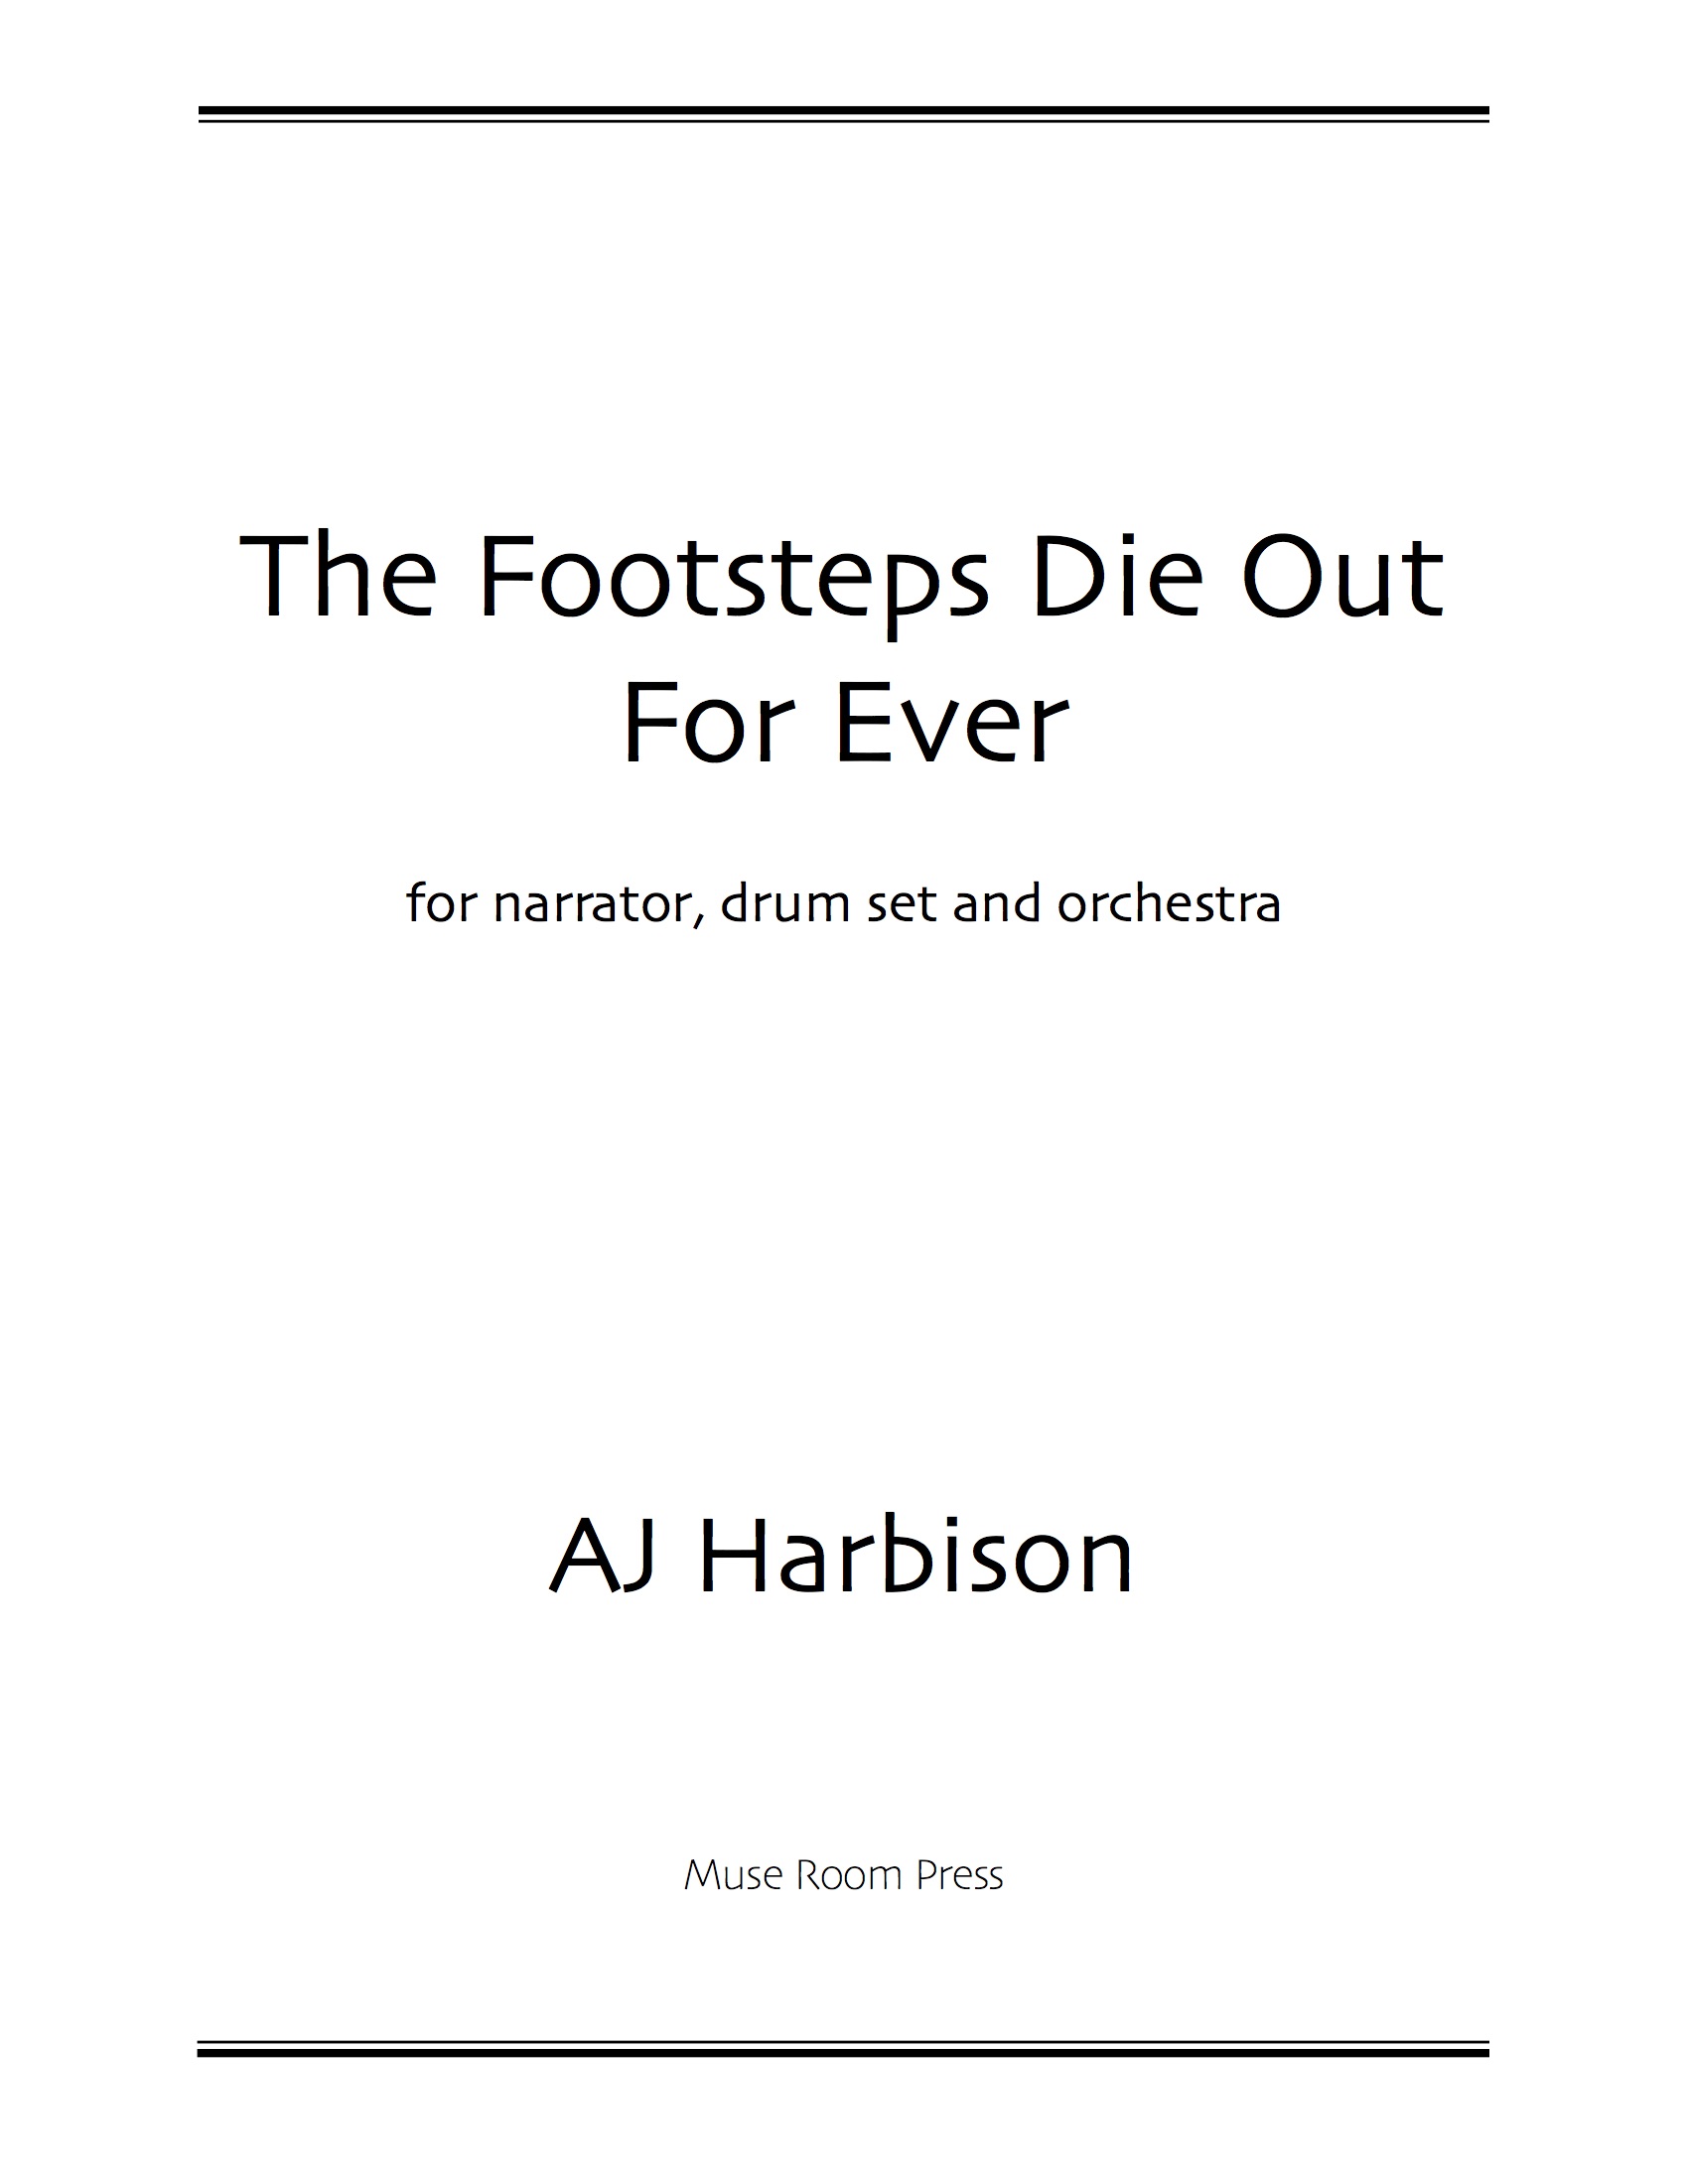 The Footsteps Die Out For Ever